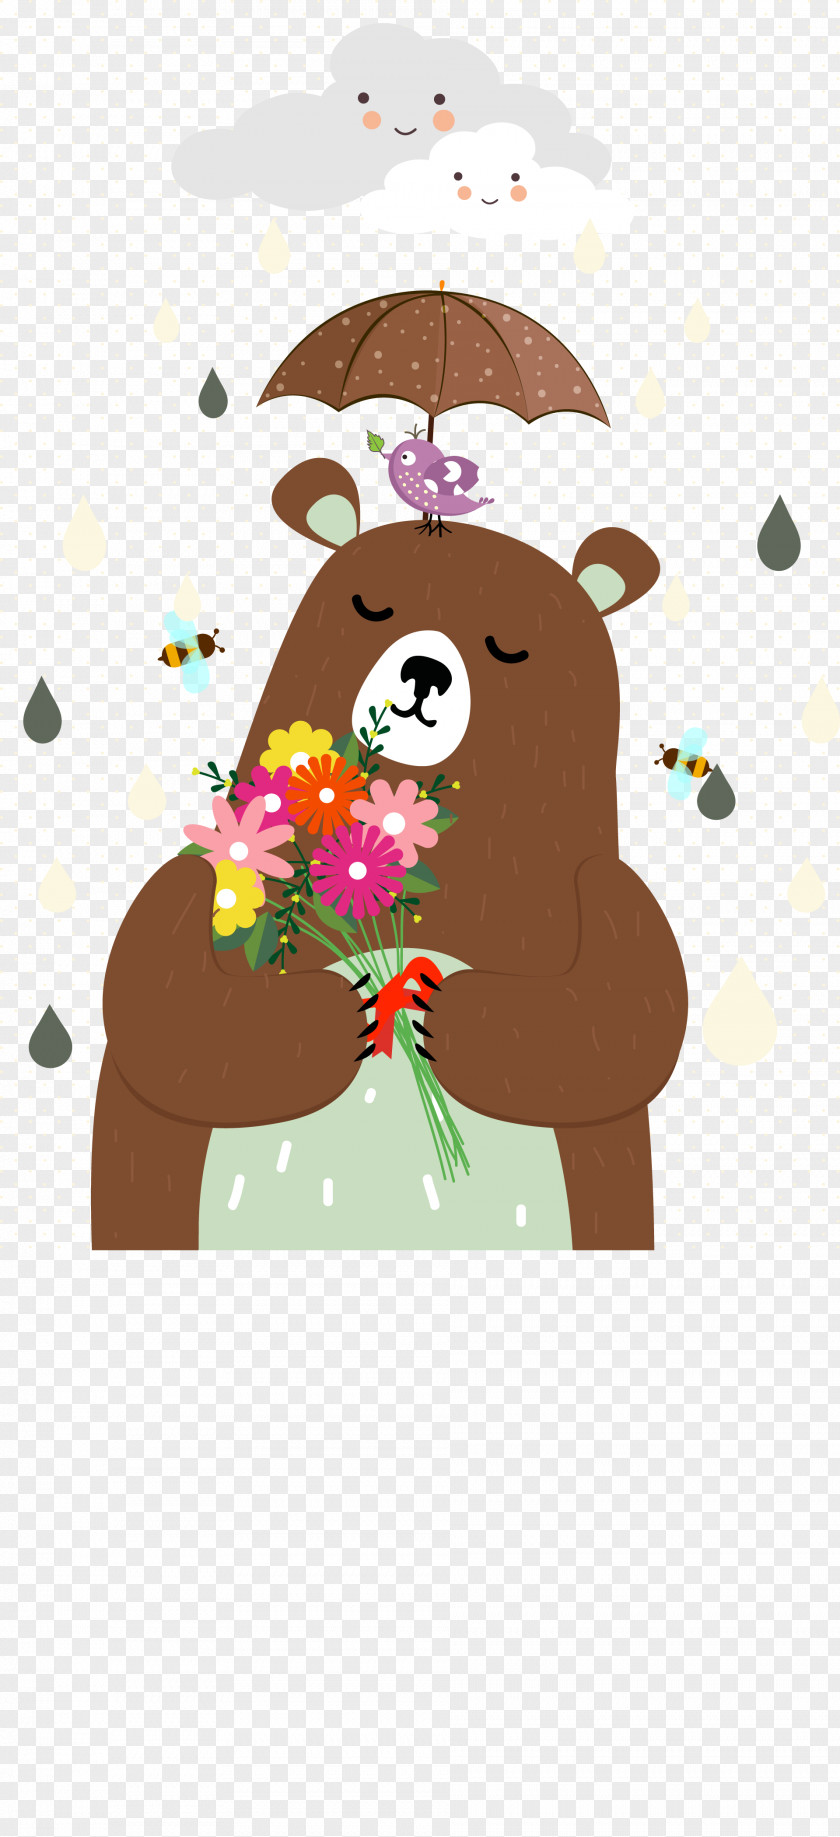 Animals With Flowers Brown Bear Animal Illustration PNG